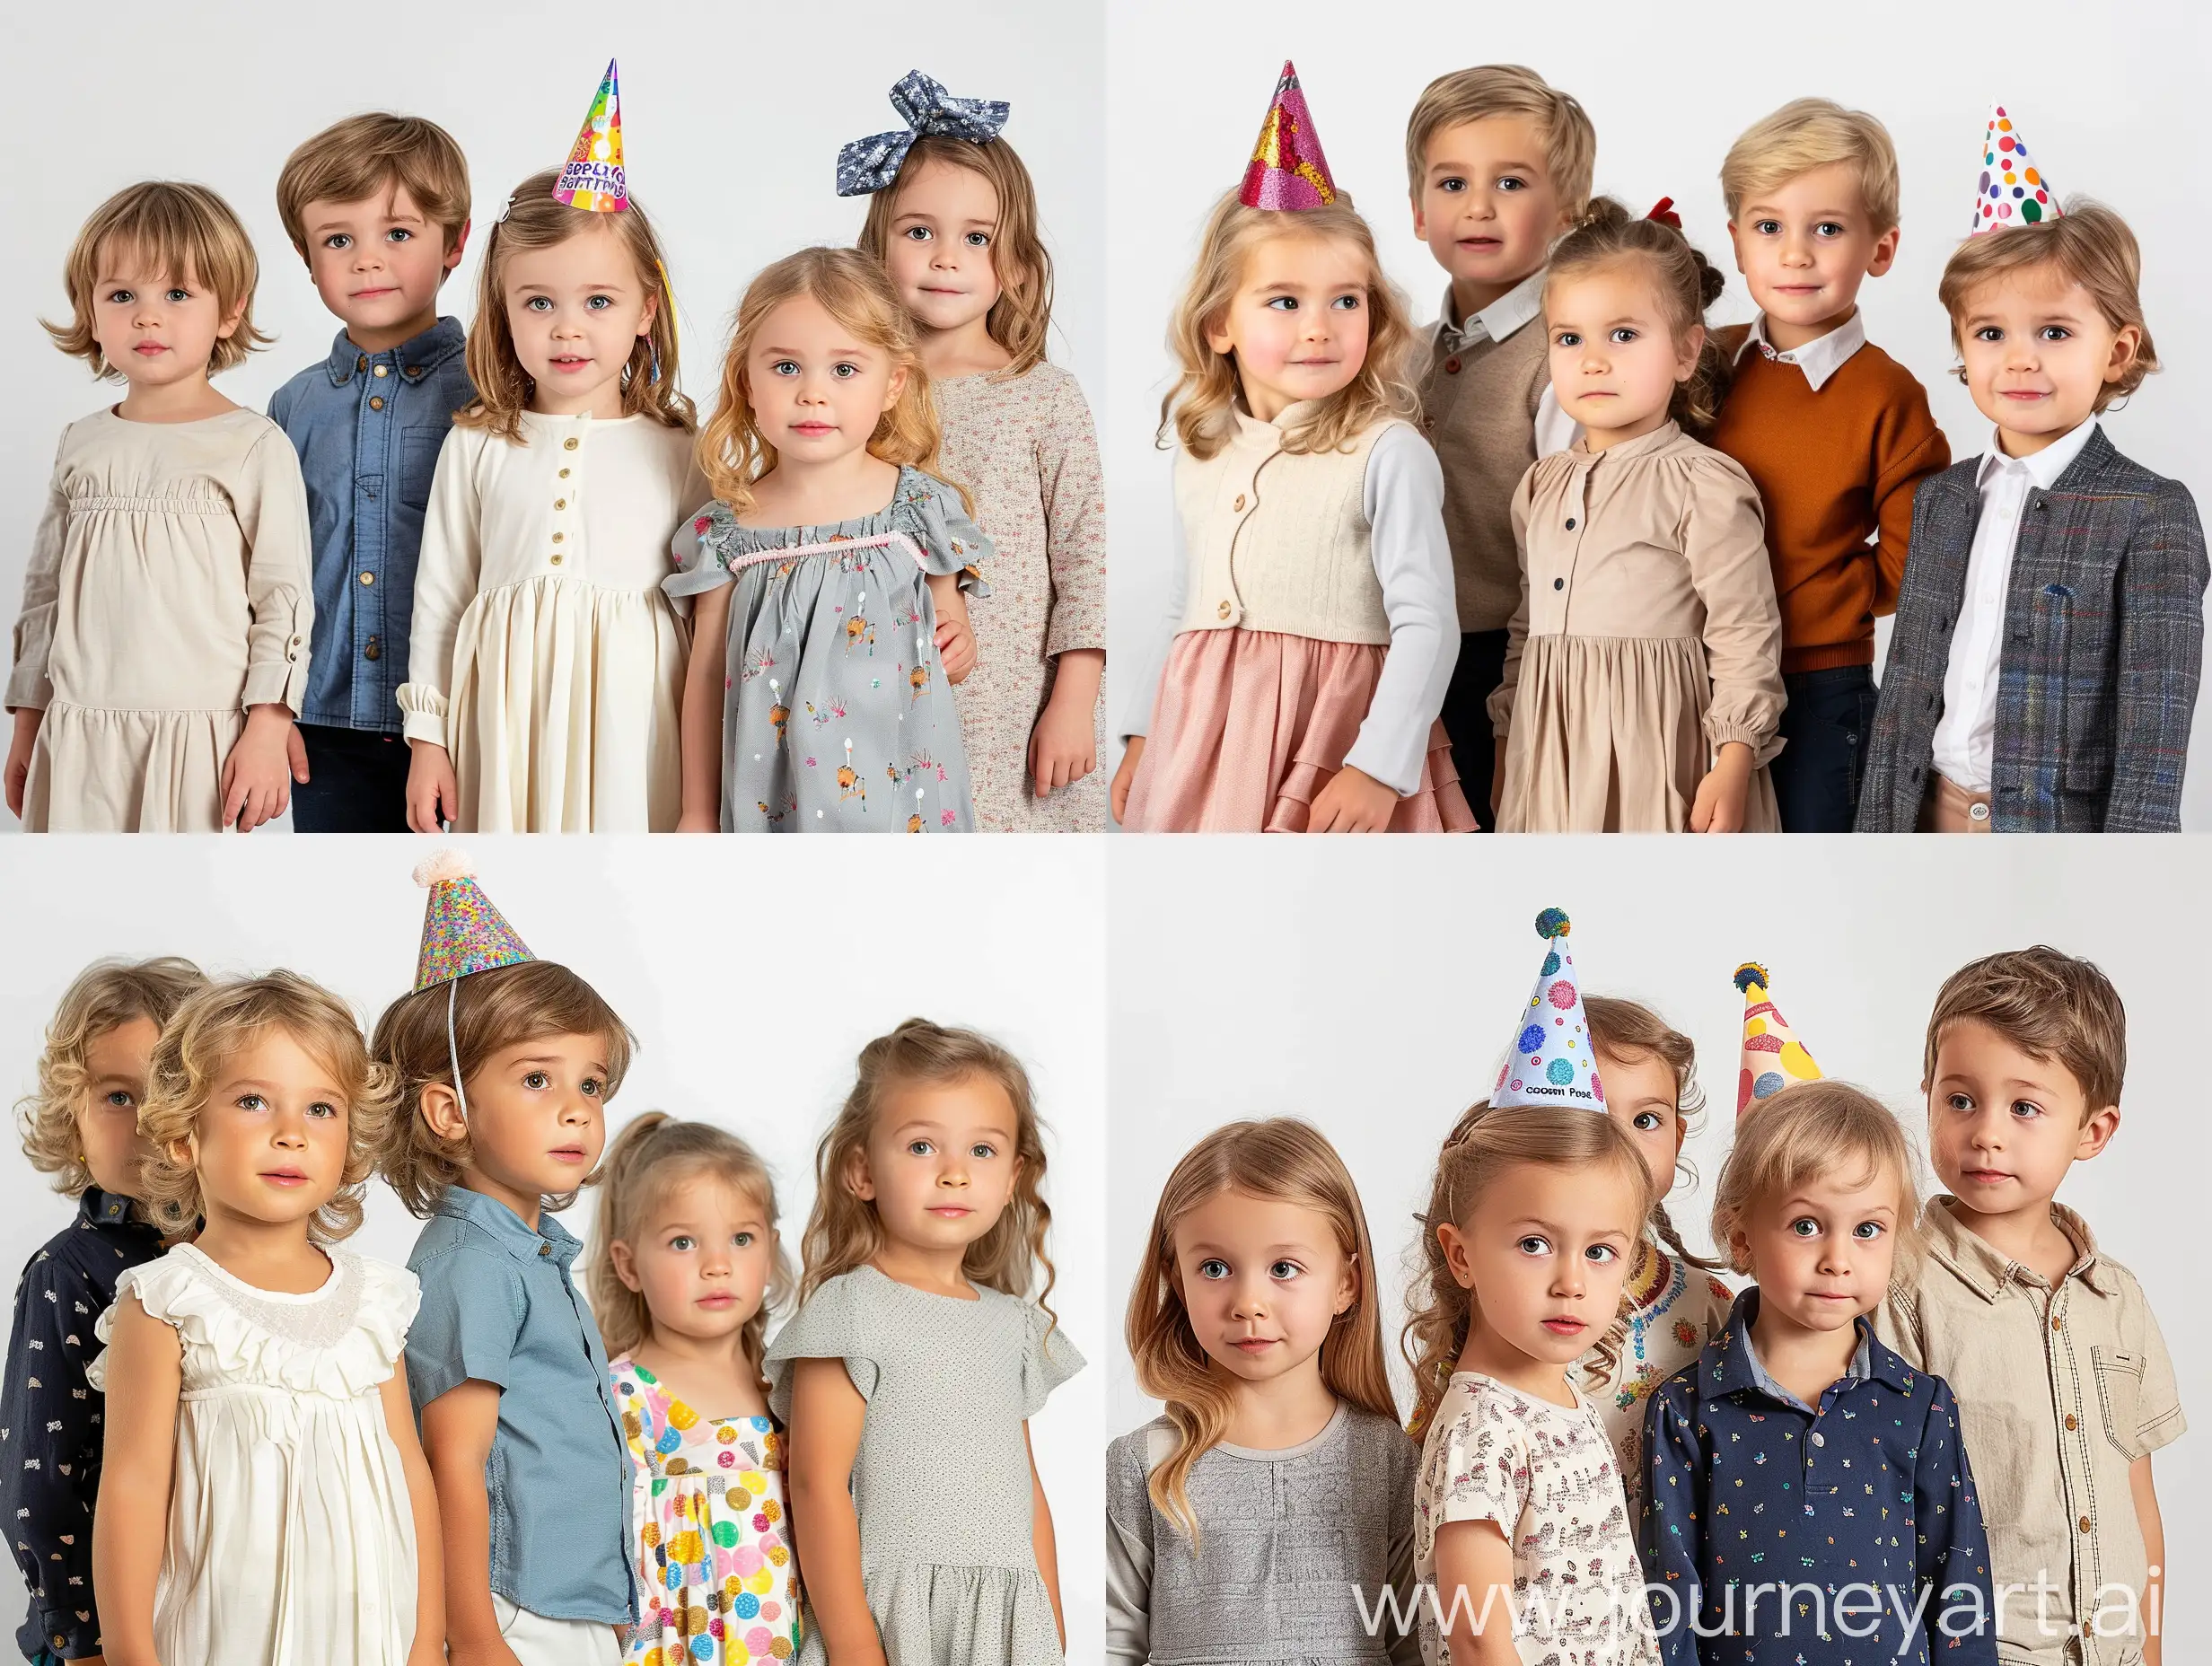 image featuring 5  European well-dressed, light-haired children 6-7 years old, one wearing birthday hat,  The children should be positioned in a way that they are all visible and appear to be enjoying the celebration in Wednesday movie style, the children should be arranged in line, The scene should be lively and joyful, capturing the essence of a birthday party, clear white background, sharp focus, depth of field, 8k photo, HDR, professional lighting, taken with Canon EOS R5, 75mm lens